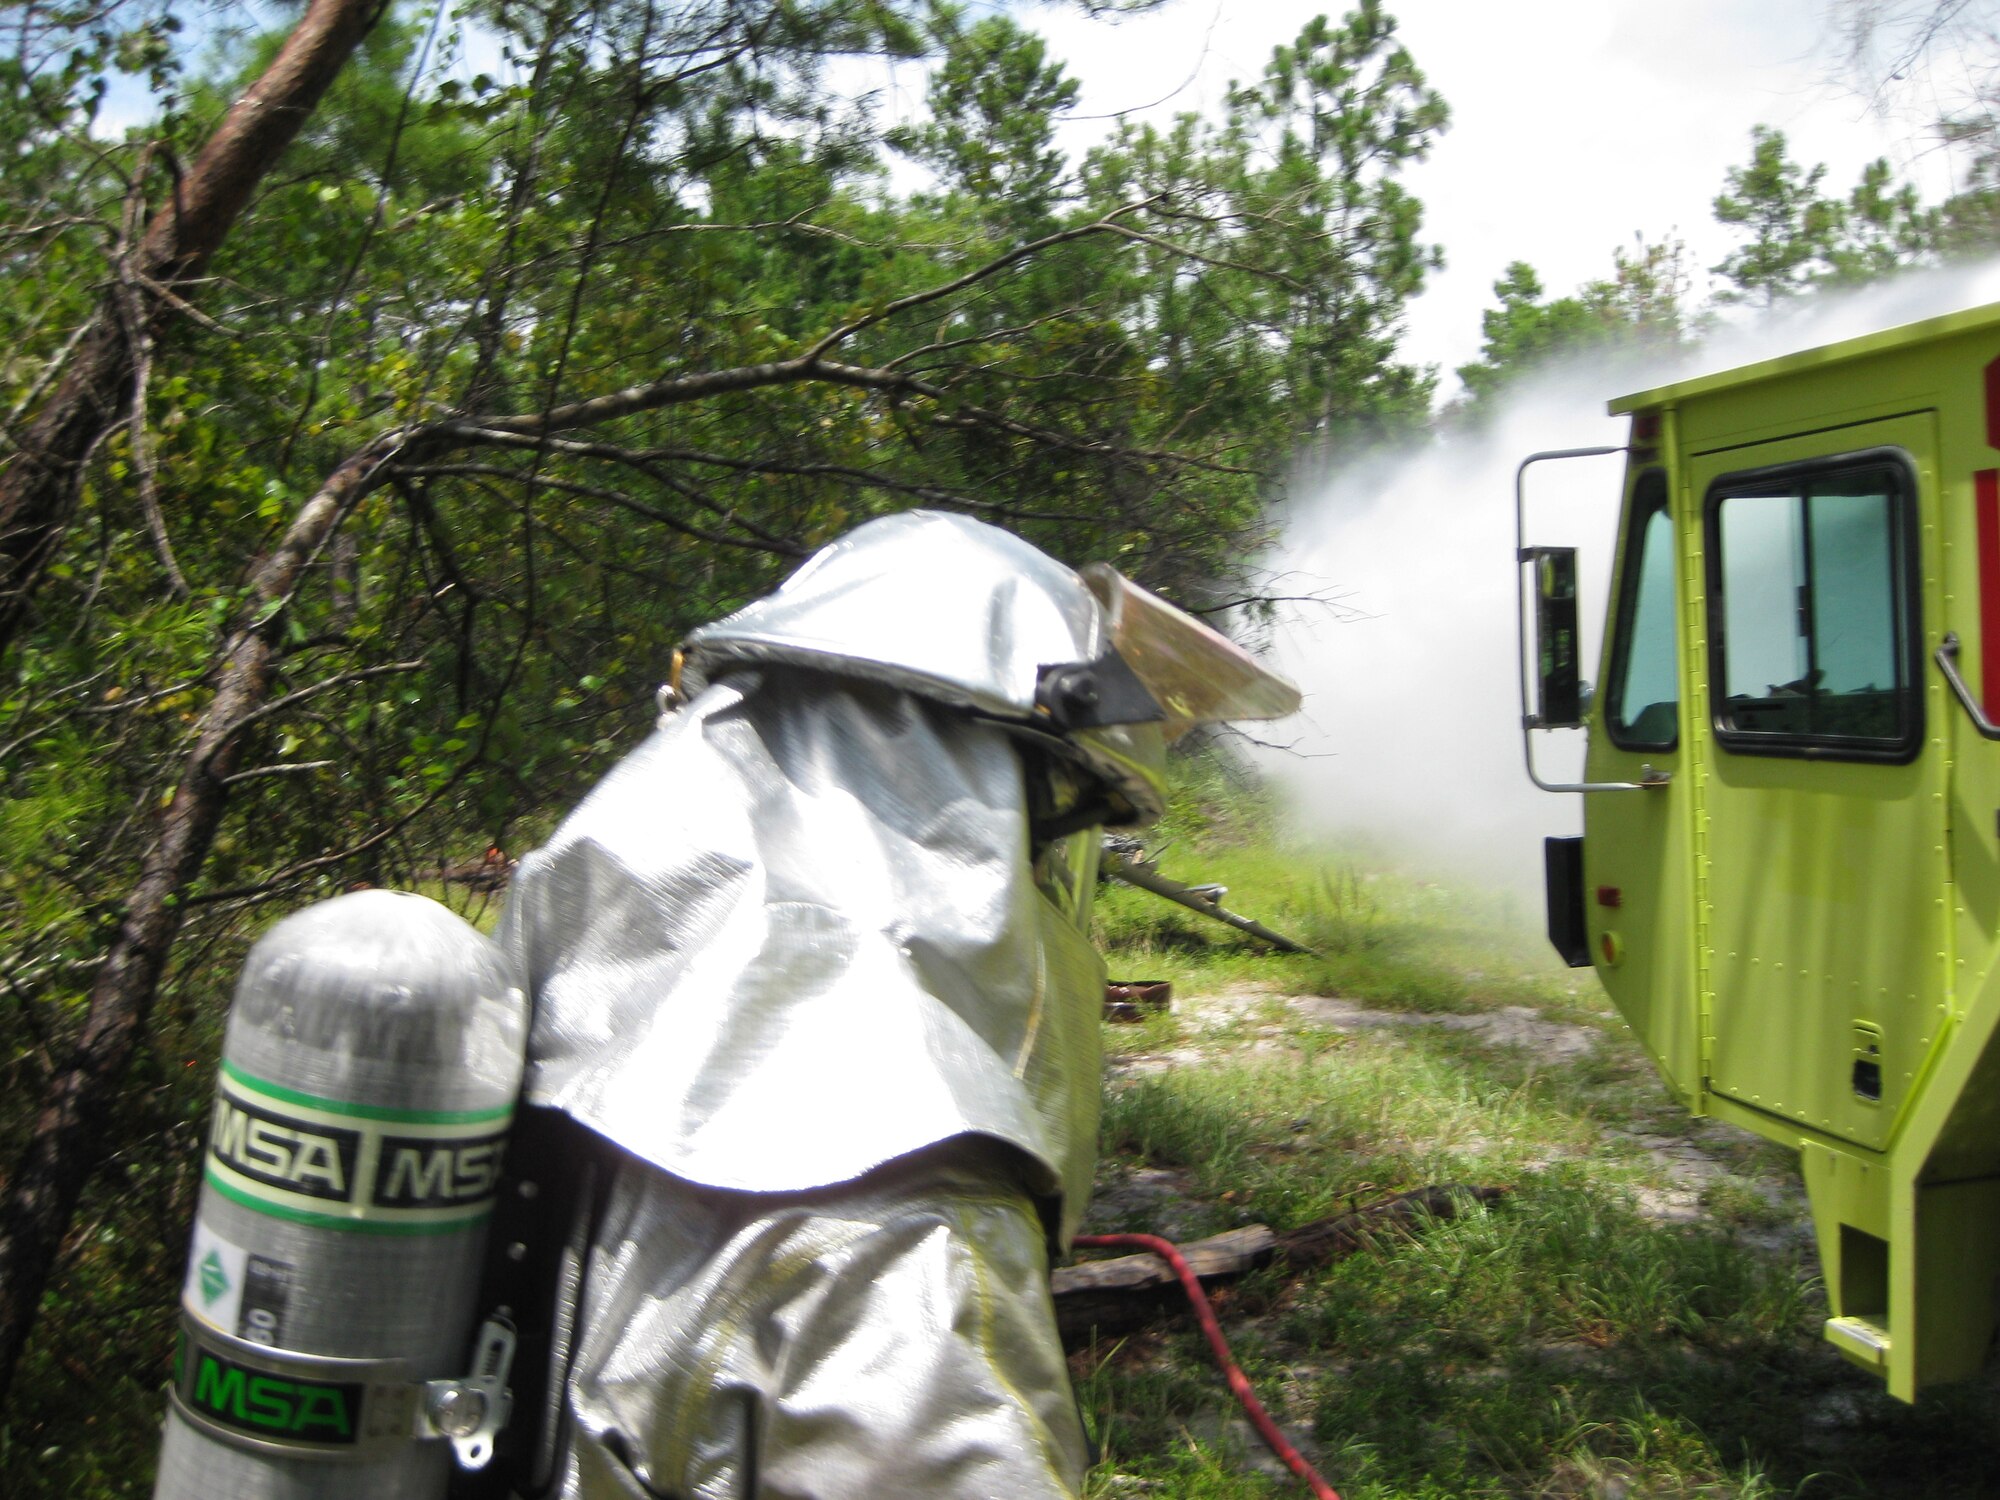 A firefighter from the 180th stands by while the P-19 Crash truck simulates putting out spot fires while participating in the Silver Flag training exercise at Tyndall AFB, FL in July, 2009.